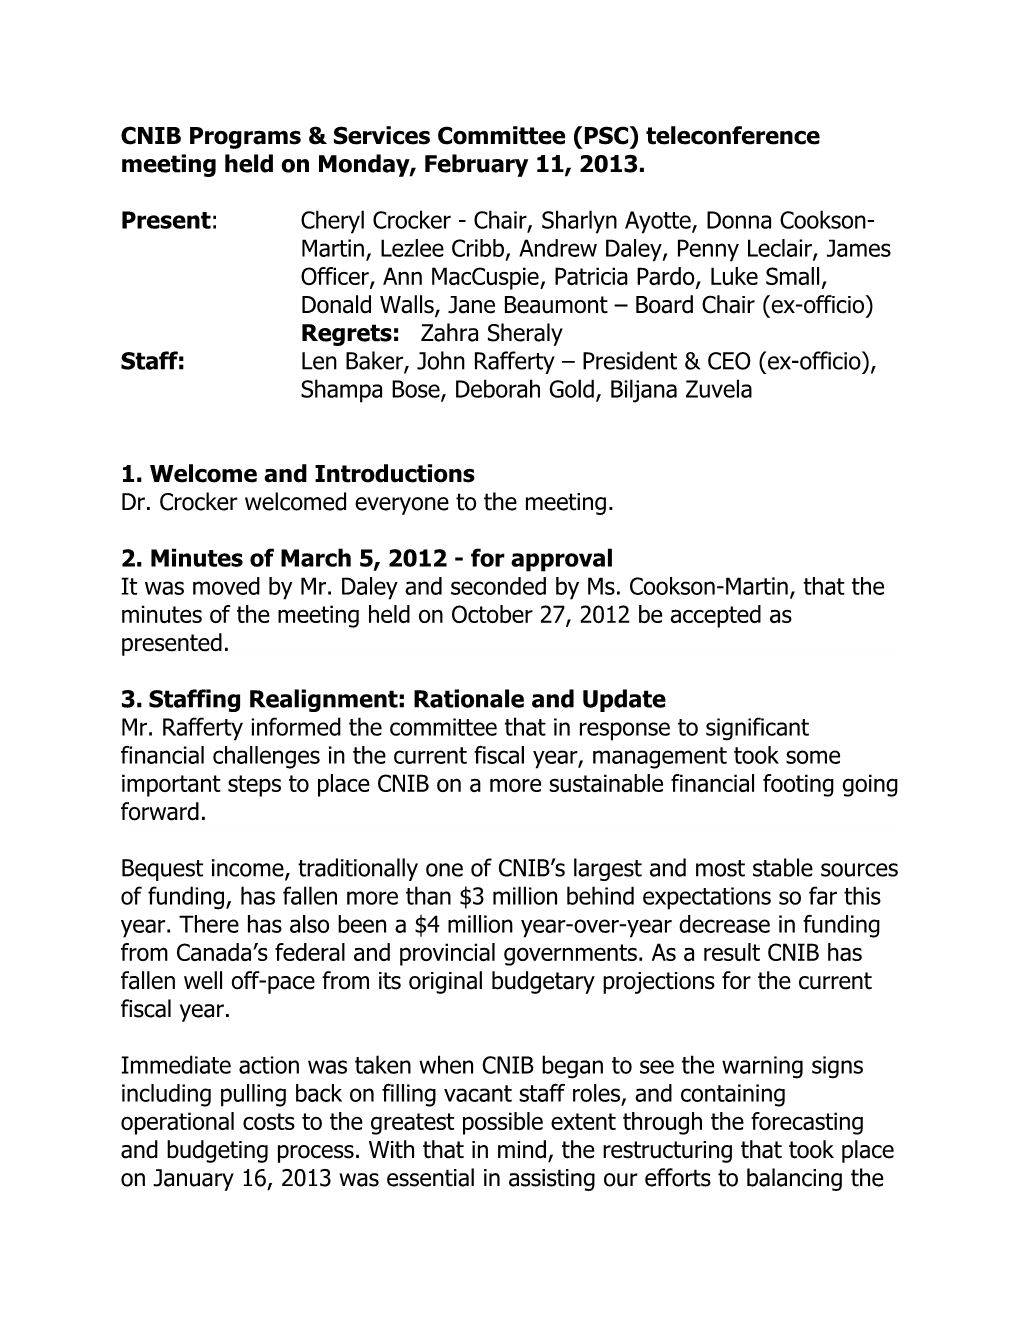 CNIB Programs & Services Committee (PSC) Teleconference Meeting Held on Monday, February